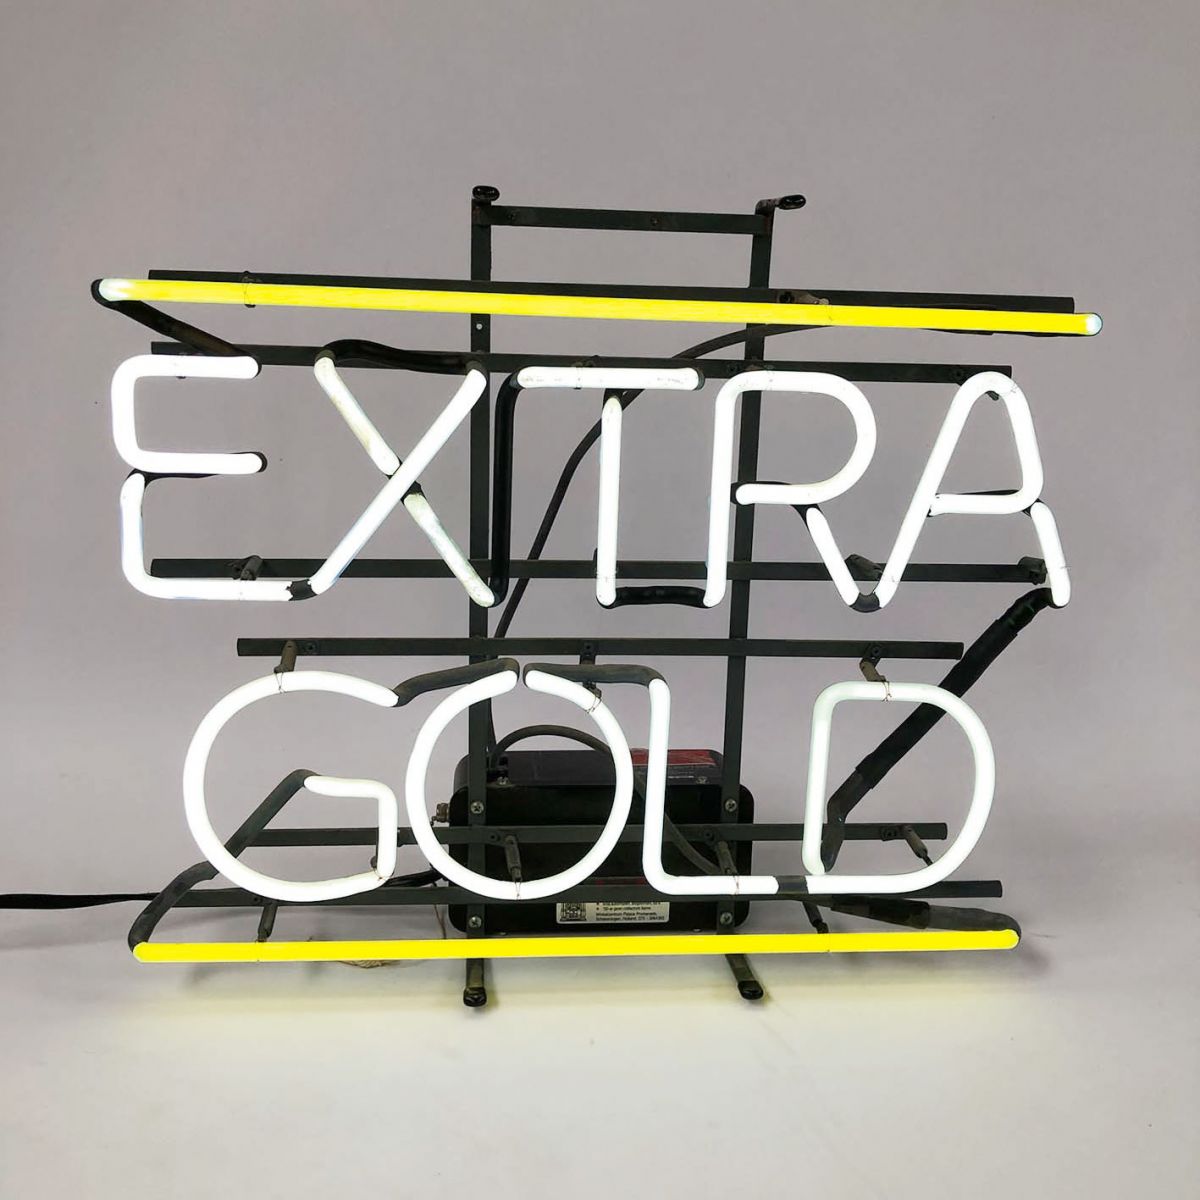 Extra Gold (Coors) Neon Sign